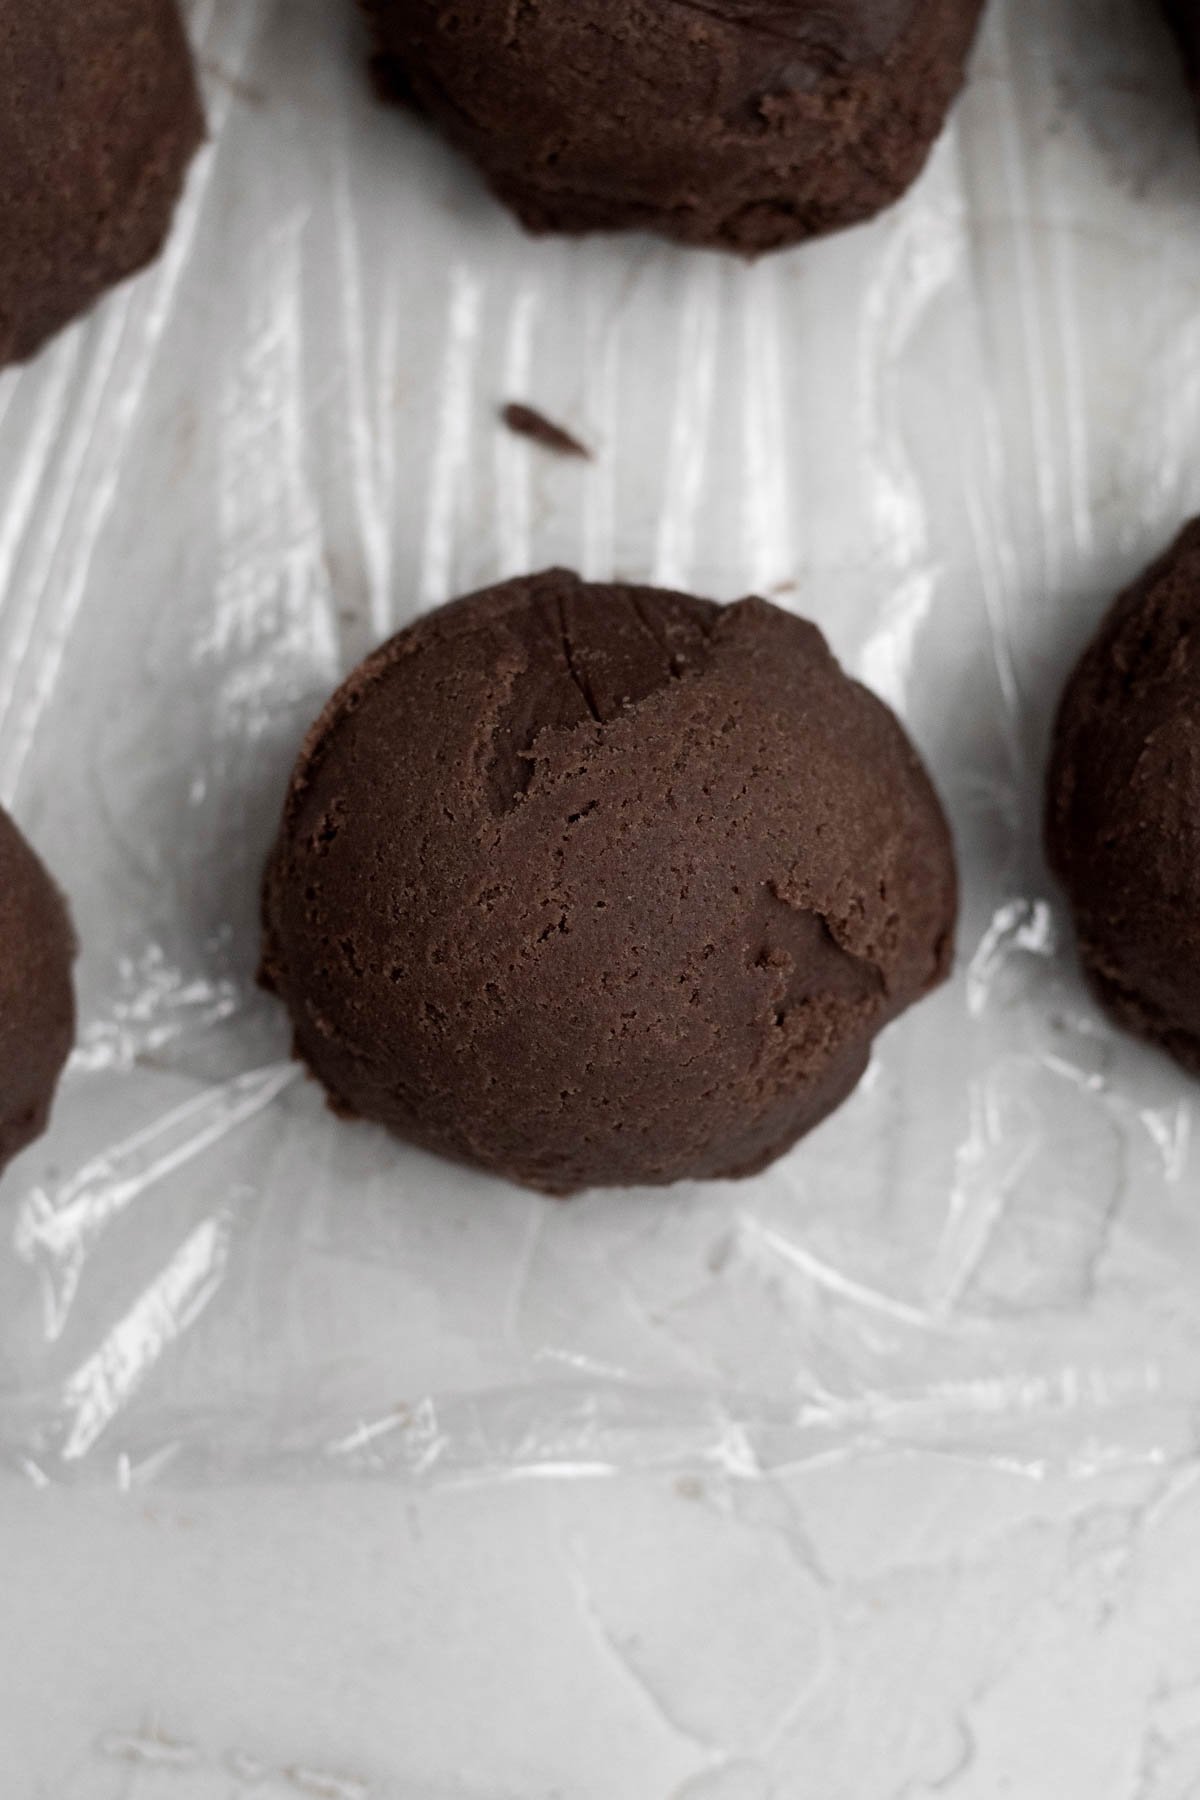 A perfect scooped ball of chocolate ginger cookie dough.